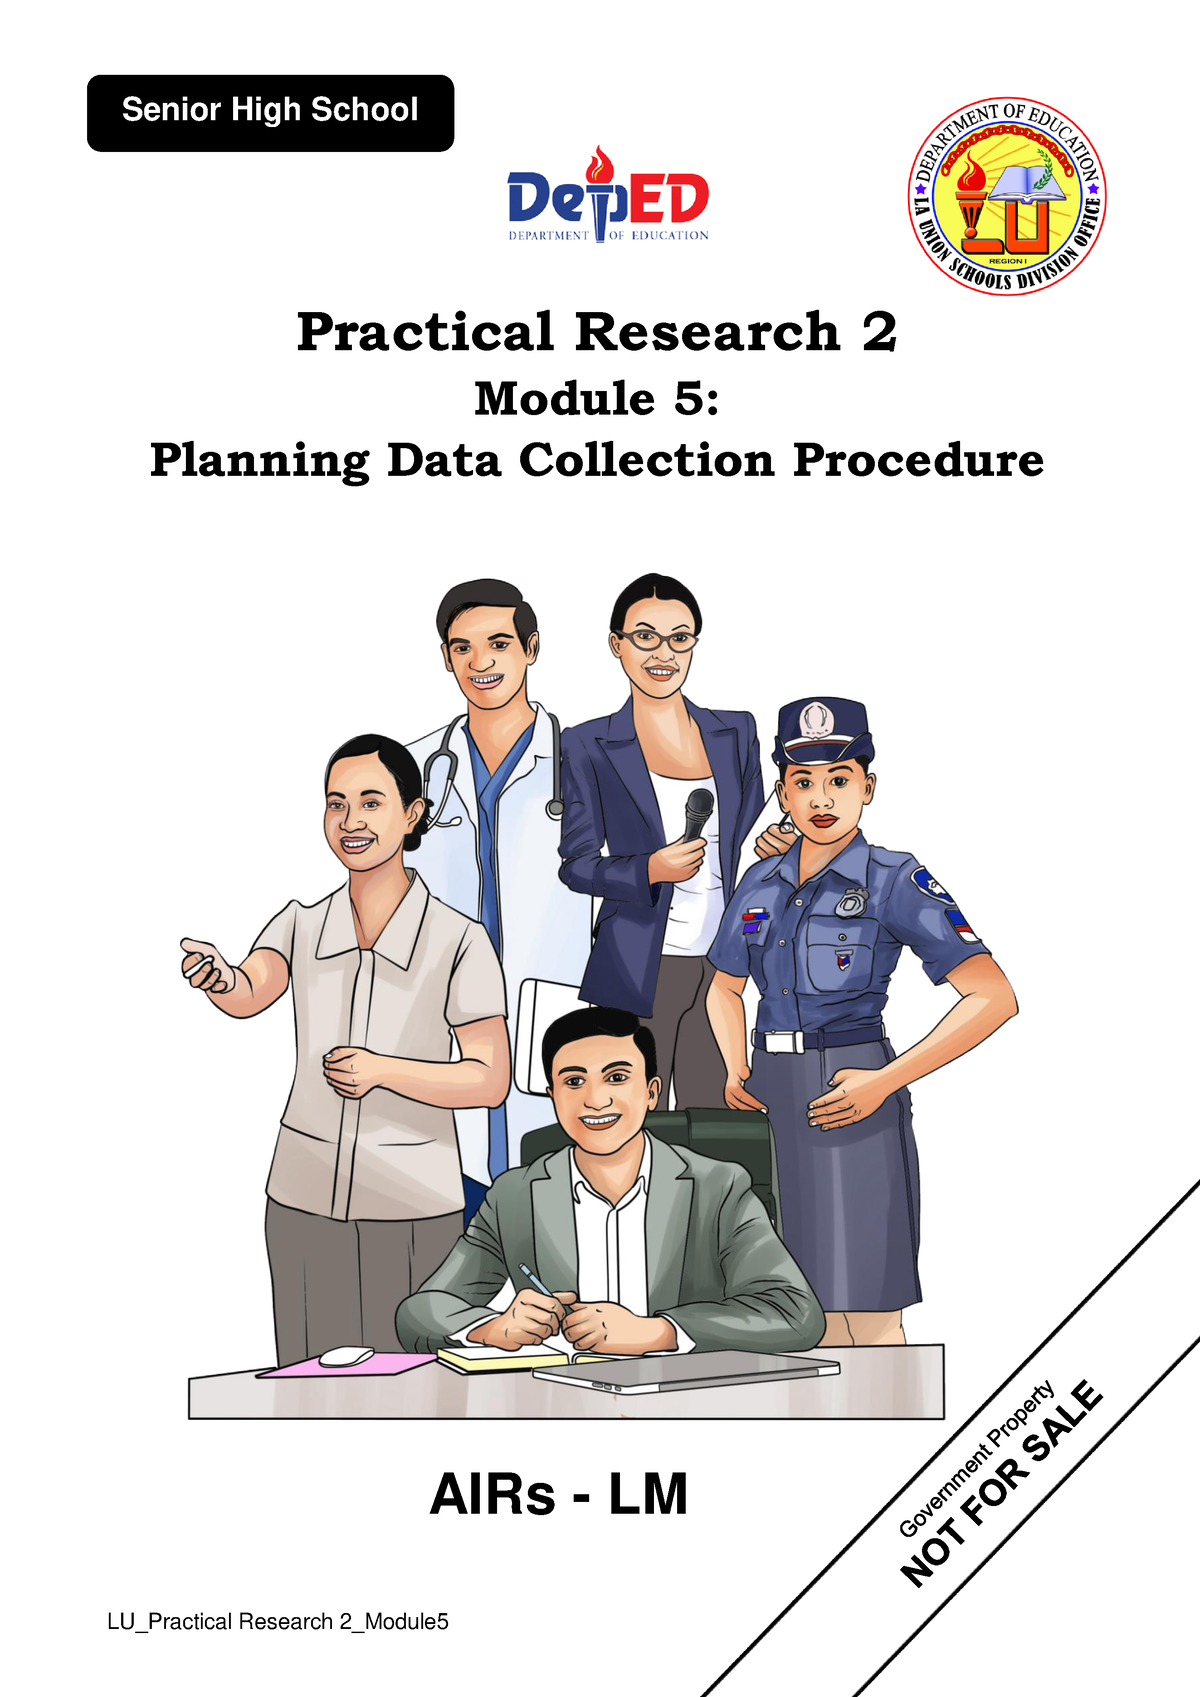 Practical Research 2 Q2 Mod5 Planning Data Collection Procedure Version 1 1 Practical Research 2970